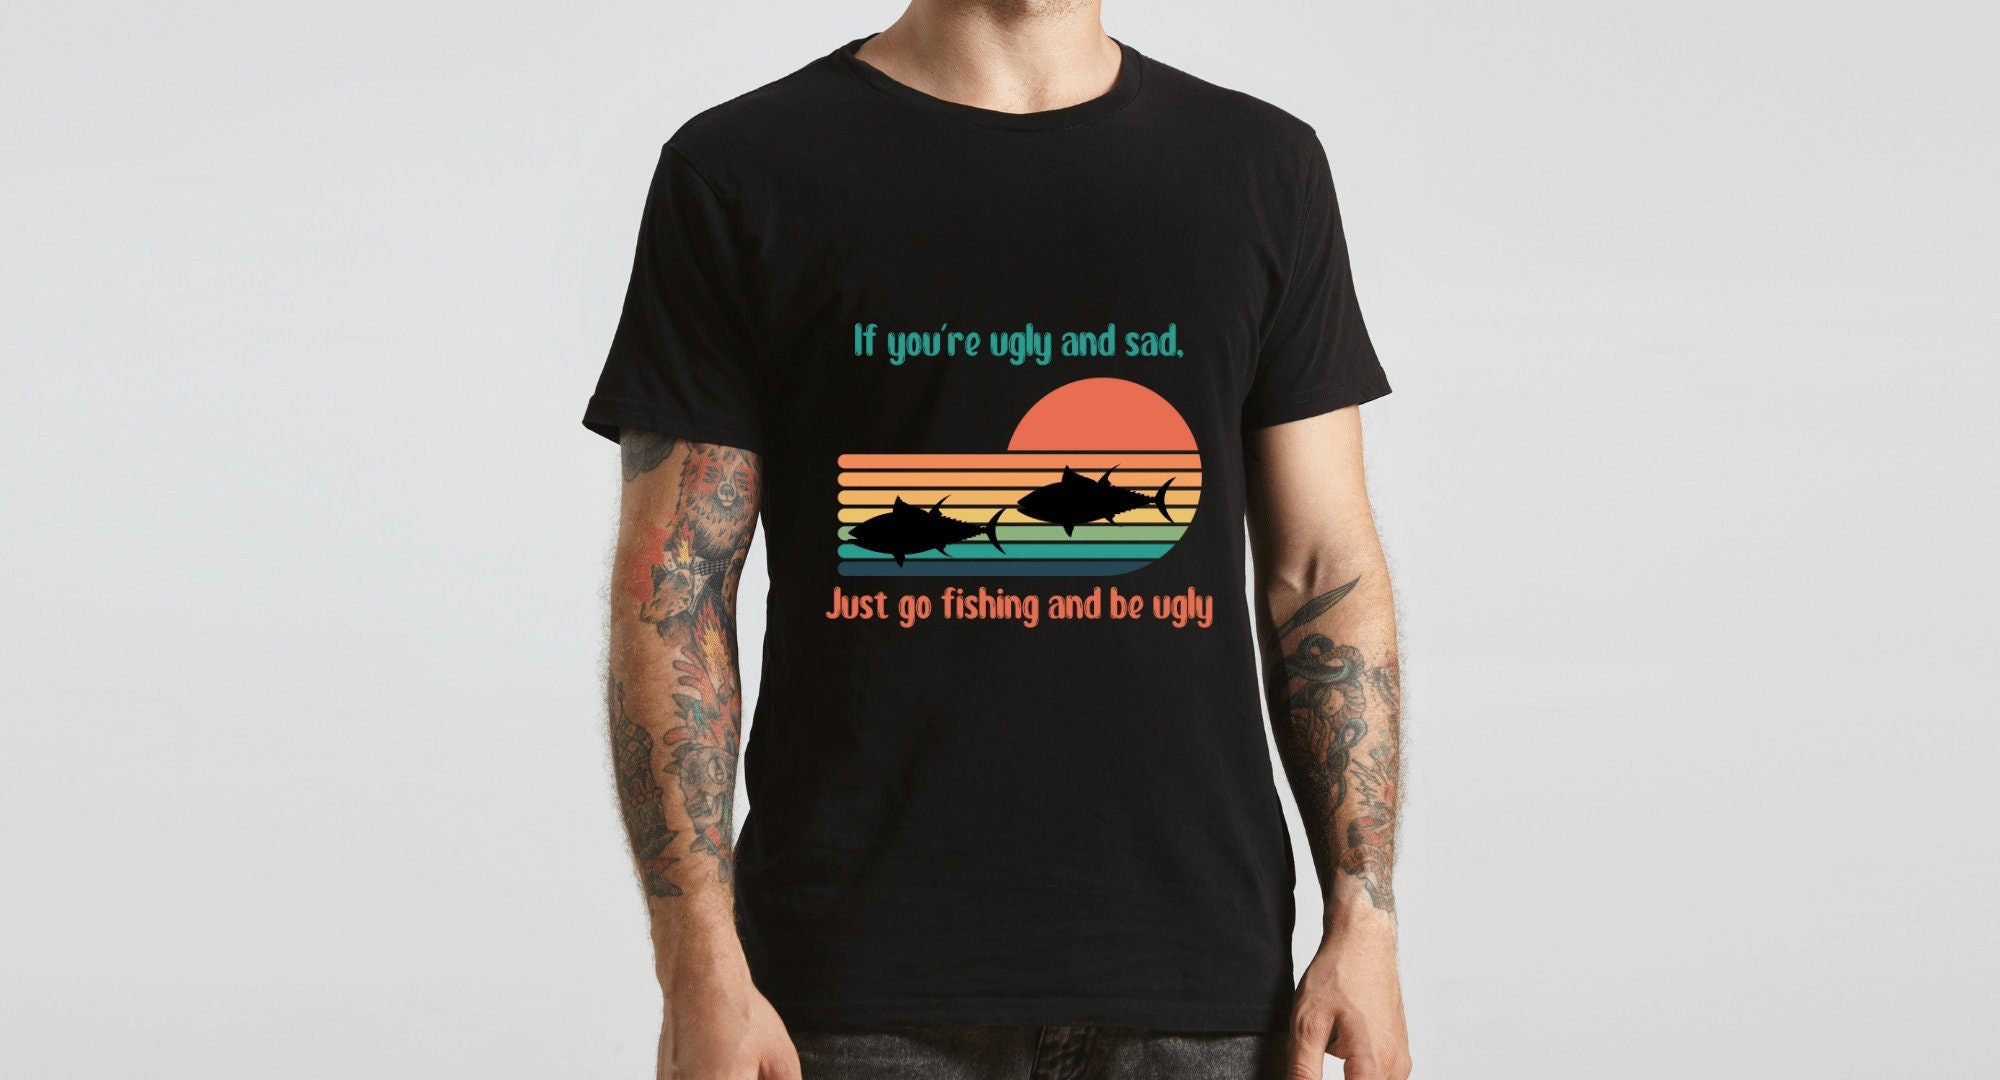 If You're Ugly and Sad, Just Go Fishing and Be Ugly Shirt | Fishing Shirt | Fisherman Shirt | Funny Shirt | unisex Jersey Short Sleeve Tee